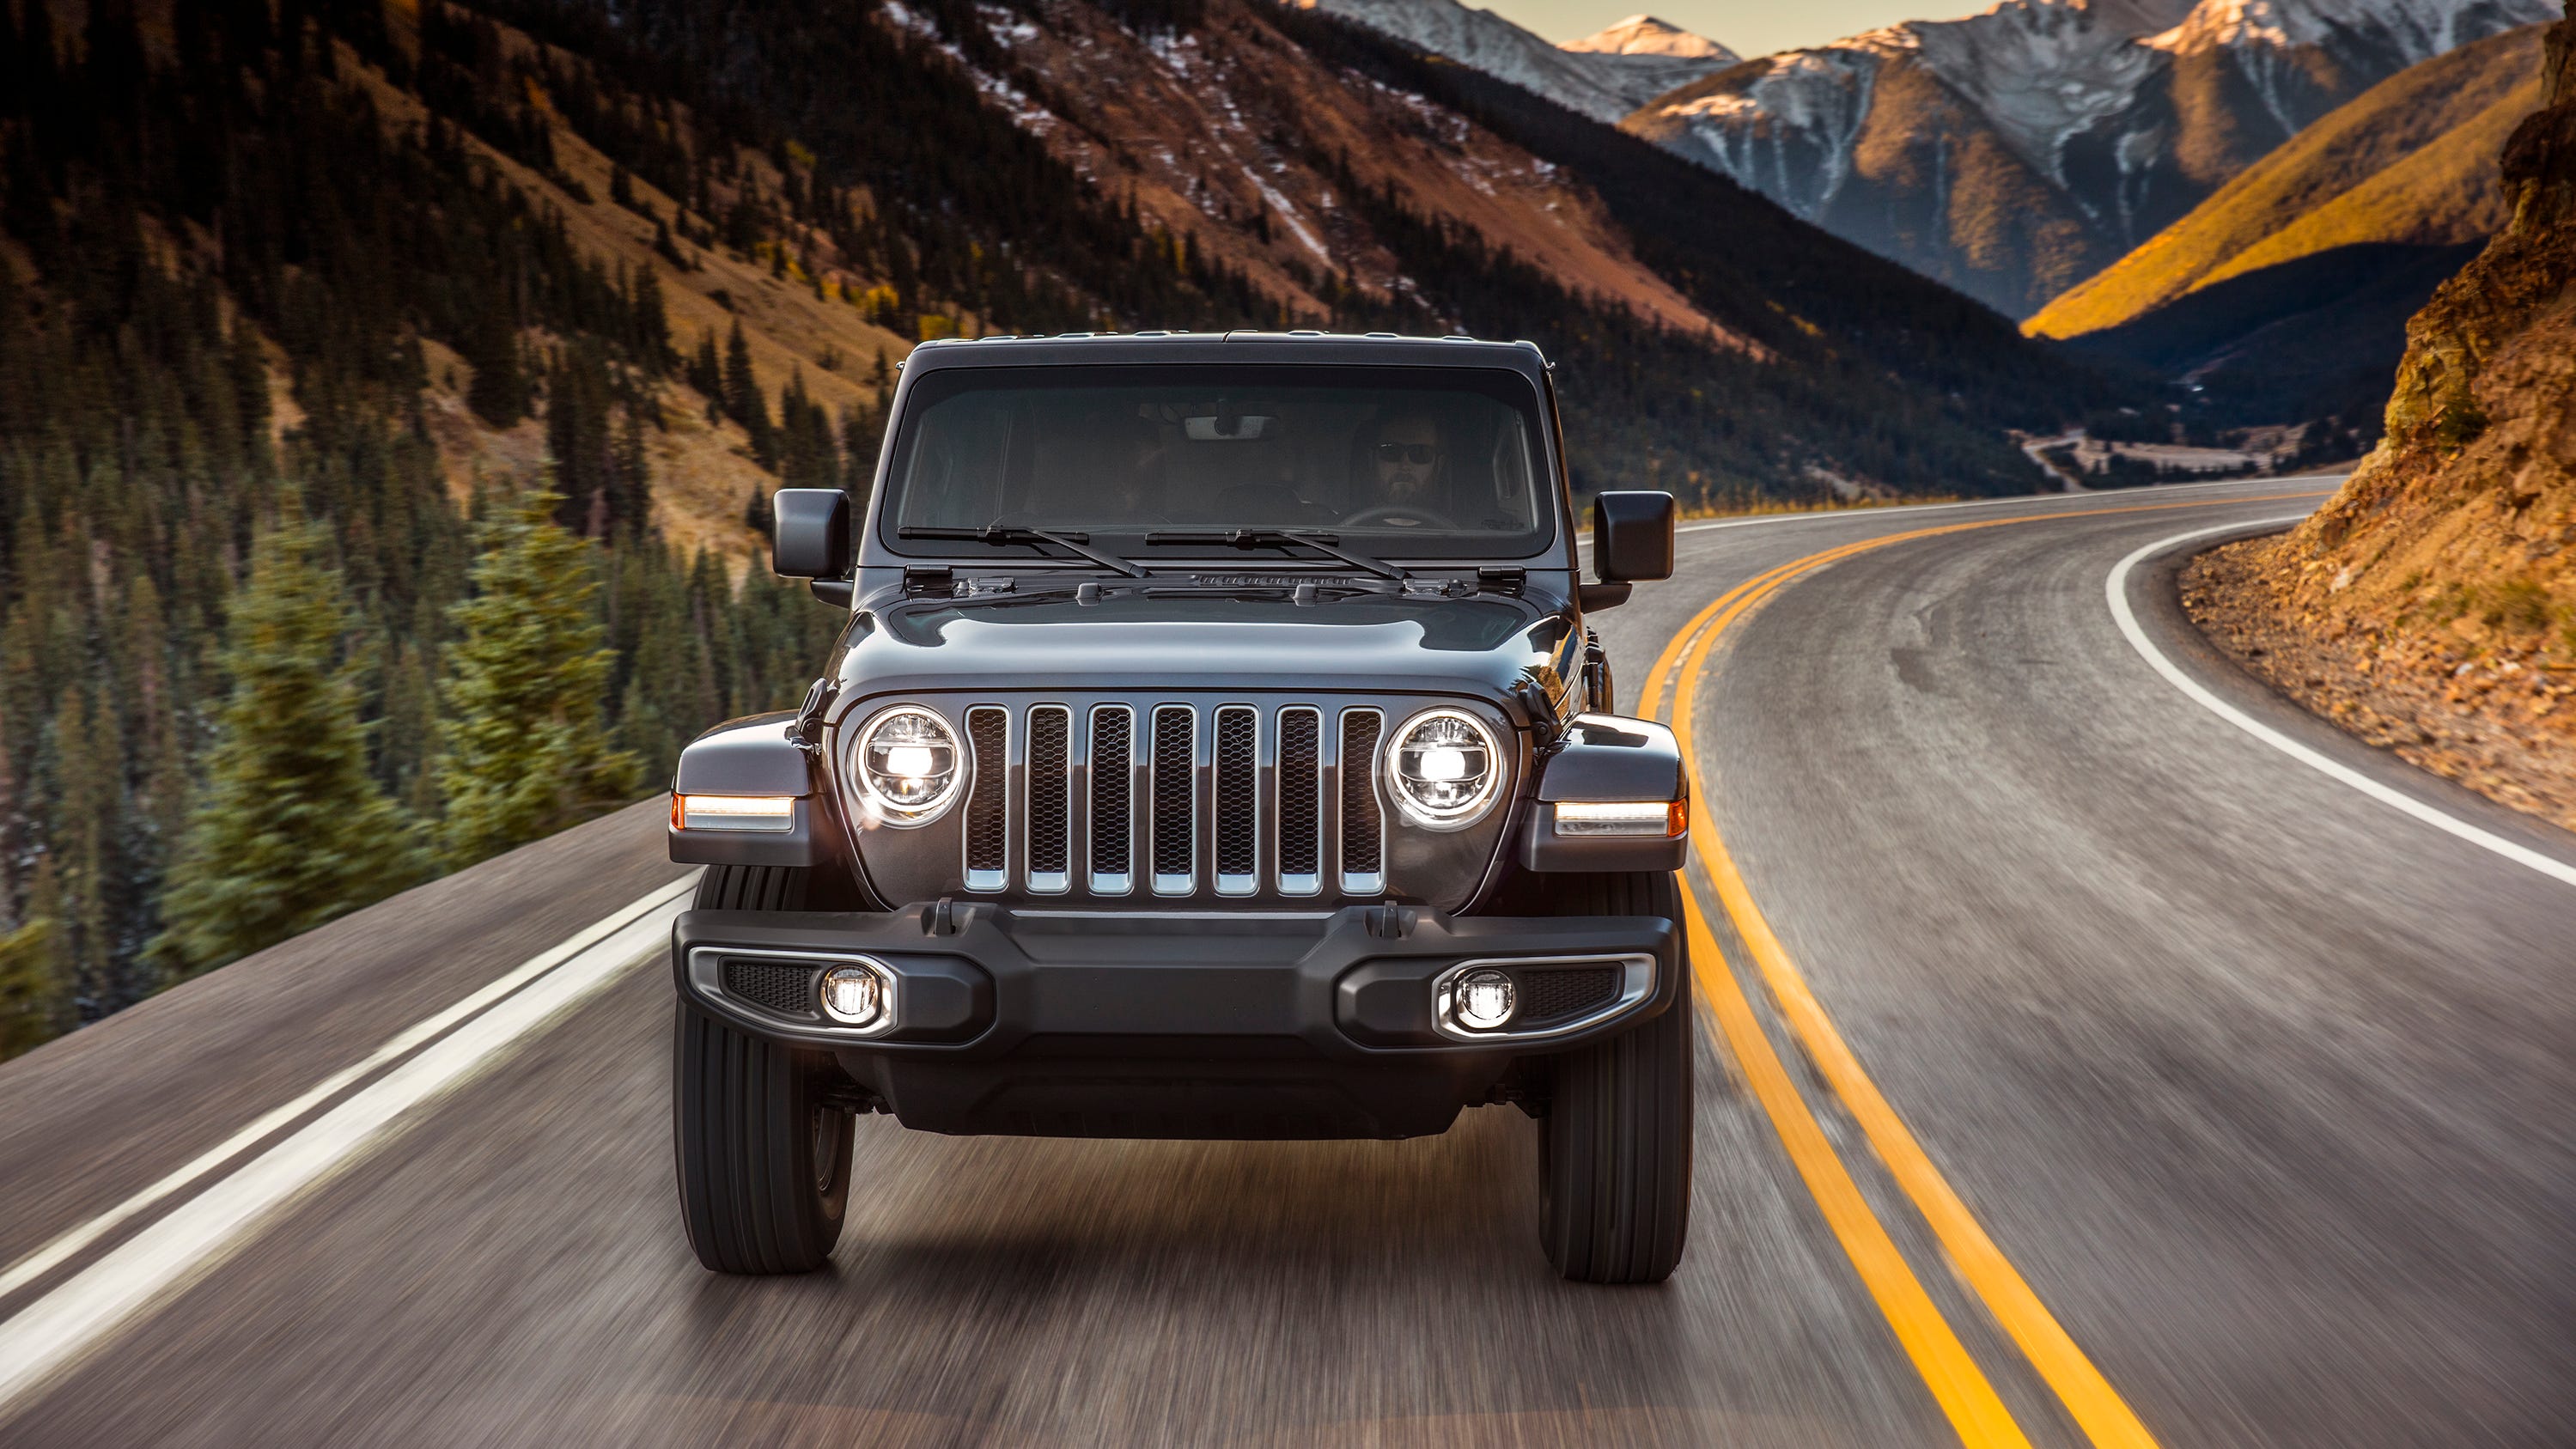 Fiat Chrysler sued over alleged Jeep Wrangler 'death wobble'